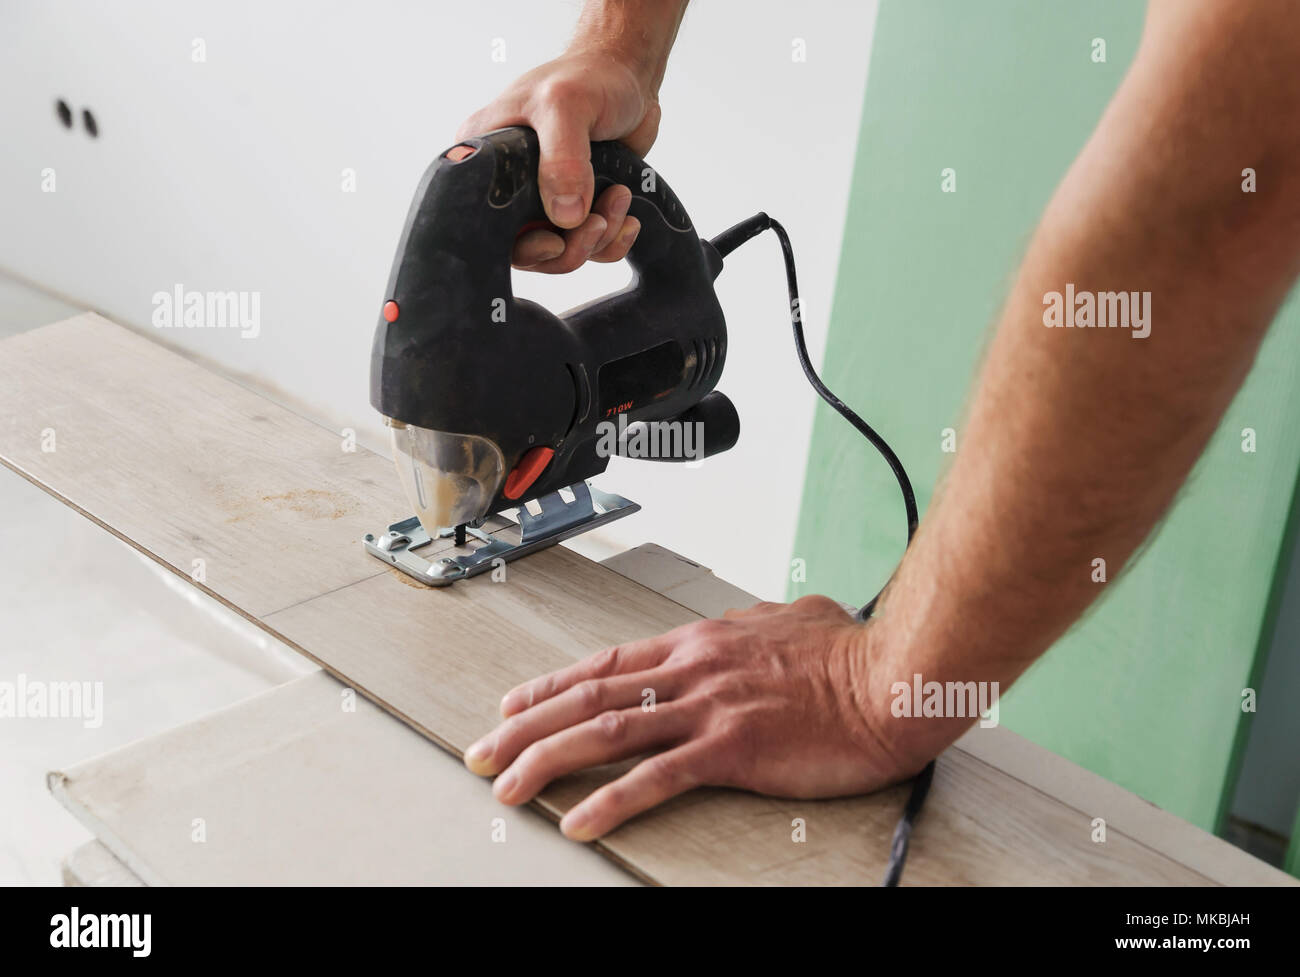 Installing Laminate Flooring Worker Cut Part Of The Board With An Electric Jigsaw Stock Photo Alamy